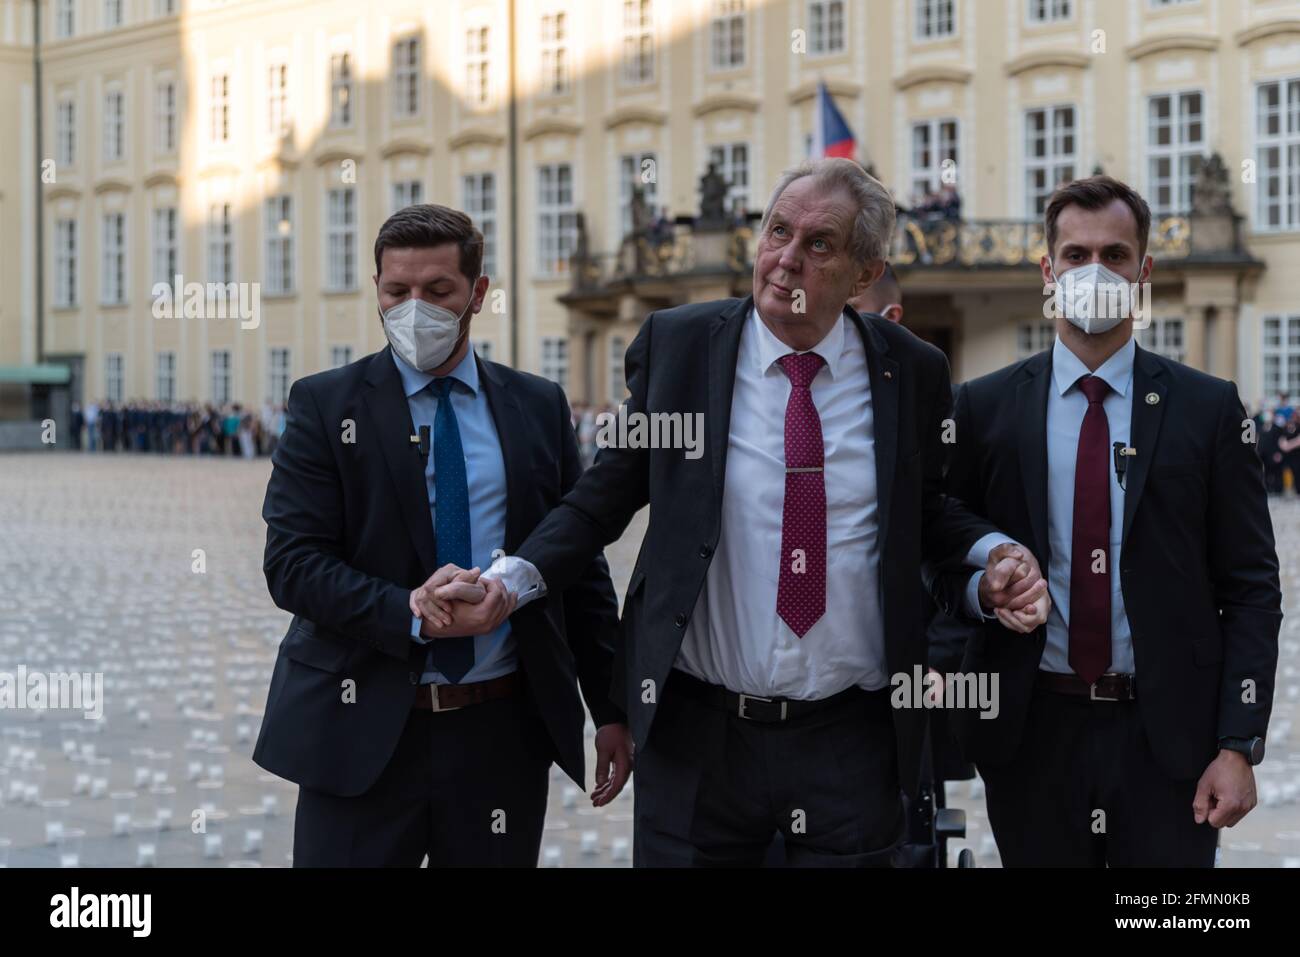 Prague, Czech Republic. 10th May, 2021. Czech president Milos Zeman seen during the commemoration of COVD-19 victims. Prague Caste commemorates almost 30000 victims of Covid-19 pandemic in Czech Republic with thousands of candles. (Photo by Tomas Tkacik/SOPA Images/Sipa USA) Credit: Sipa USA/Alamy Live News Stock Photo